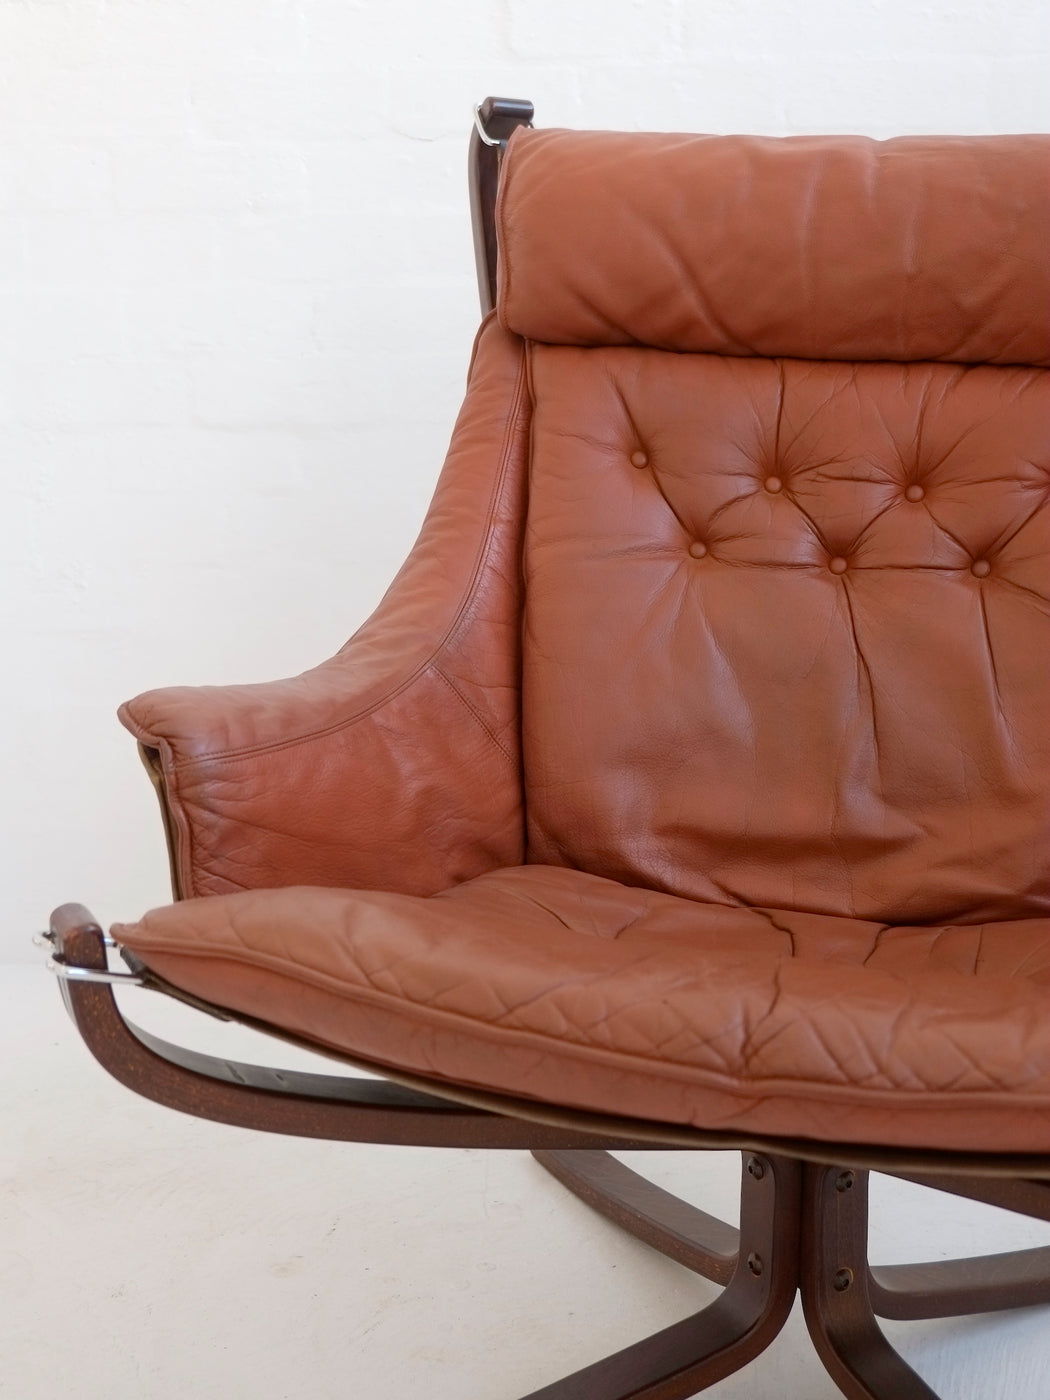 Sigurd Ressell 'Falcon' Chair